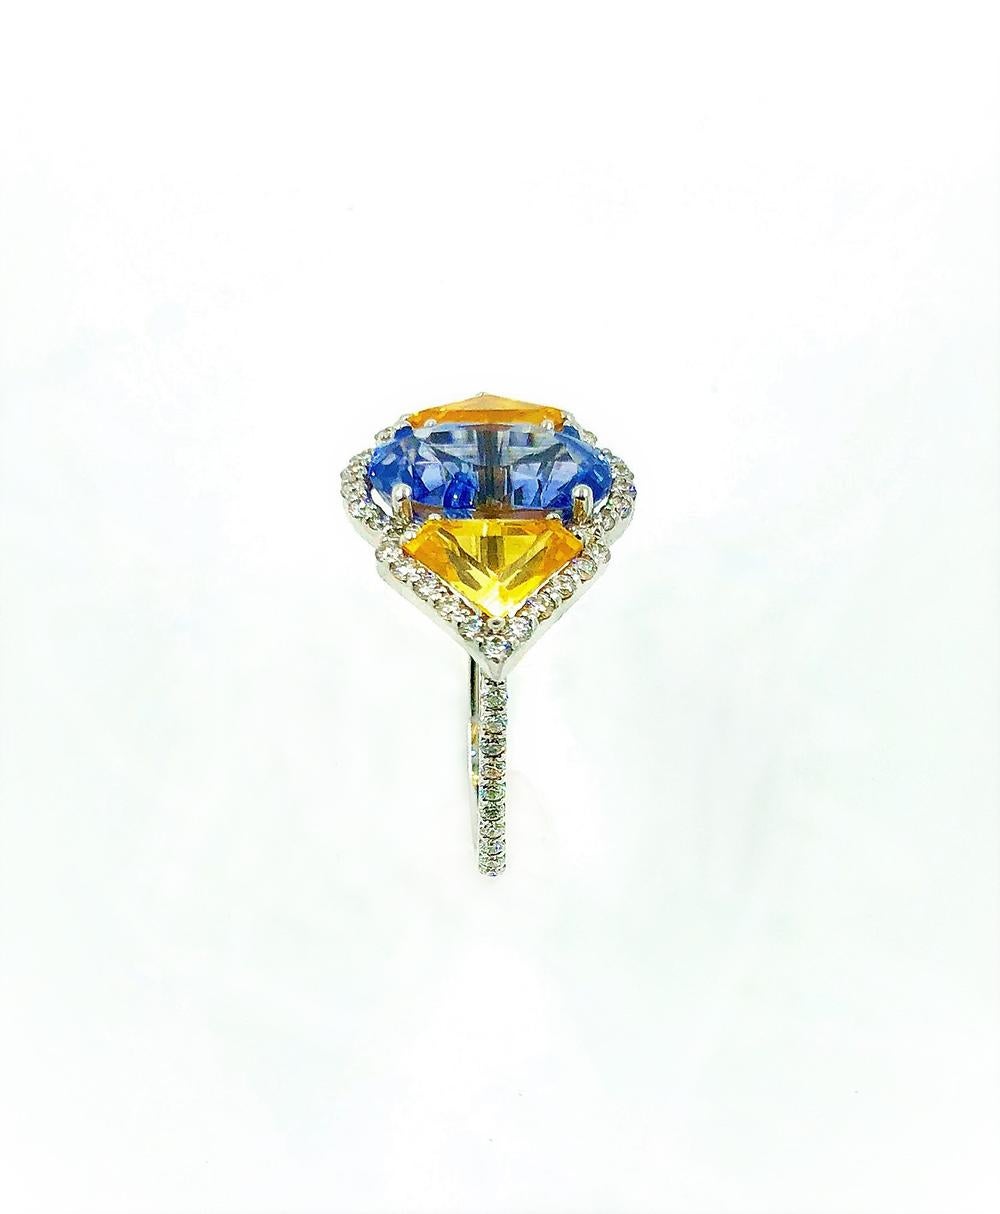 Contemporary Ceylon Blue and Yellow Sapphire Diamond Gold Cocktail Ring Weighing 8.26 Carat